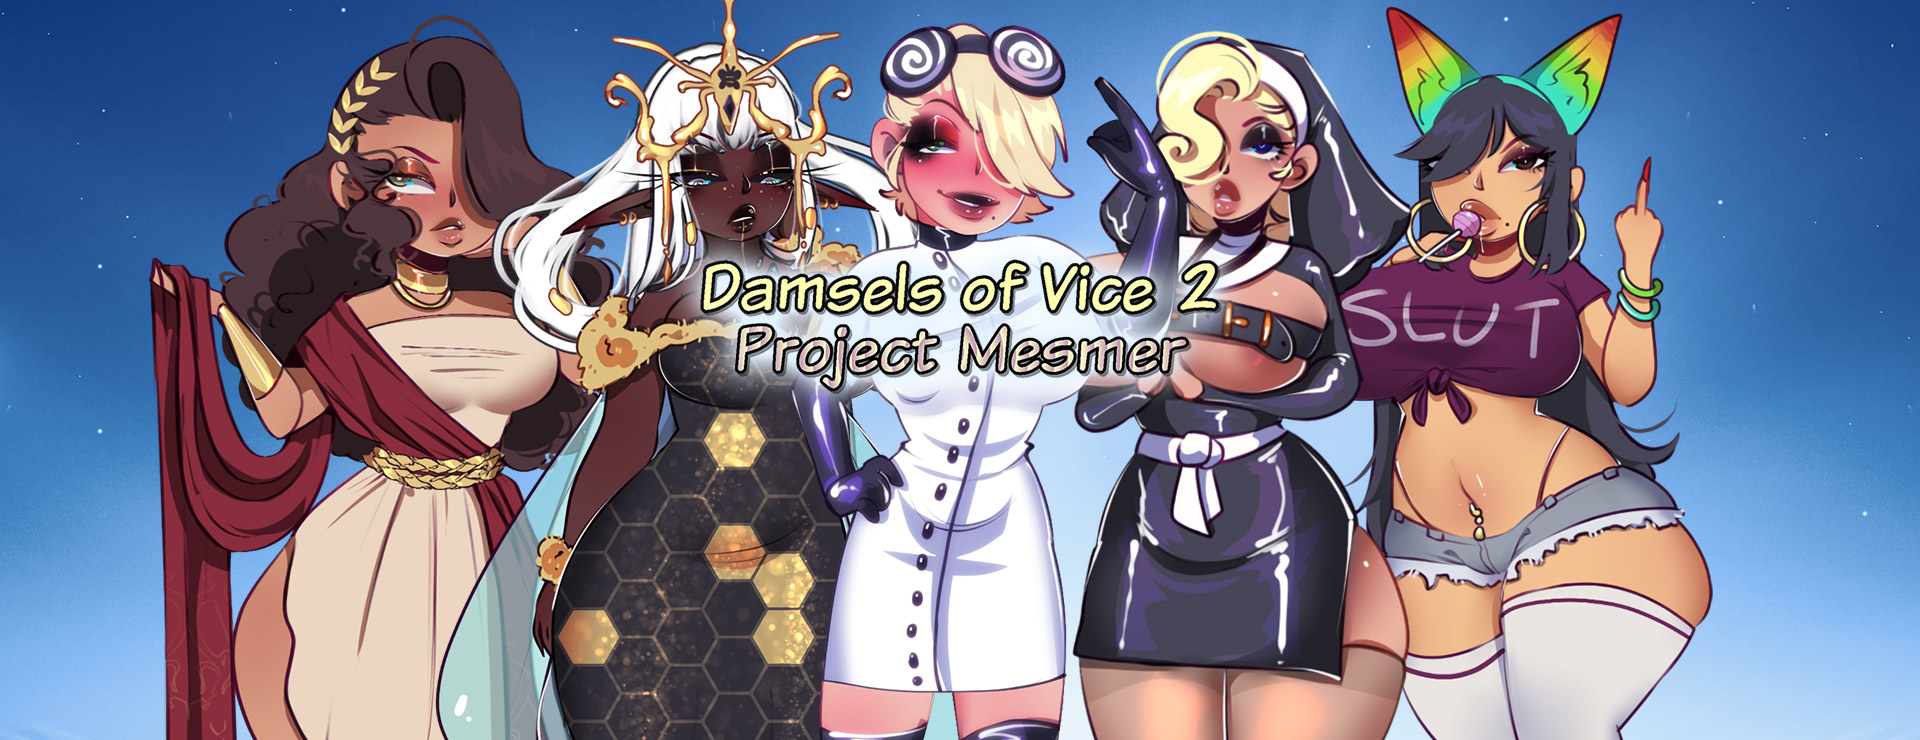 Damsels of Vice 2: Project Mesmer - RPG ゲーム